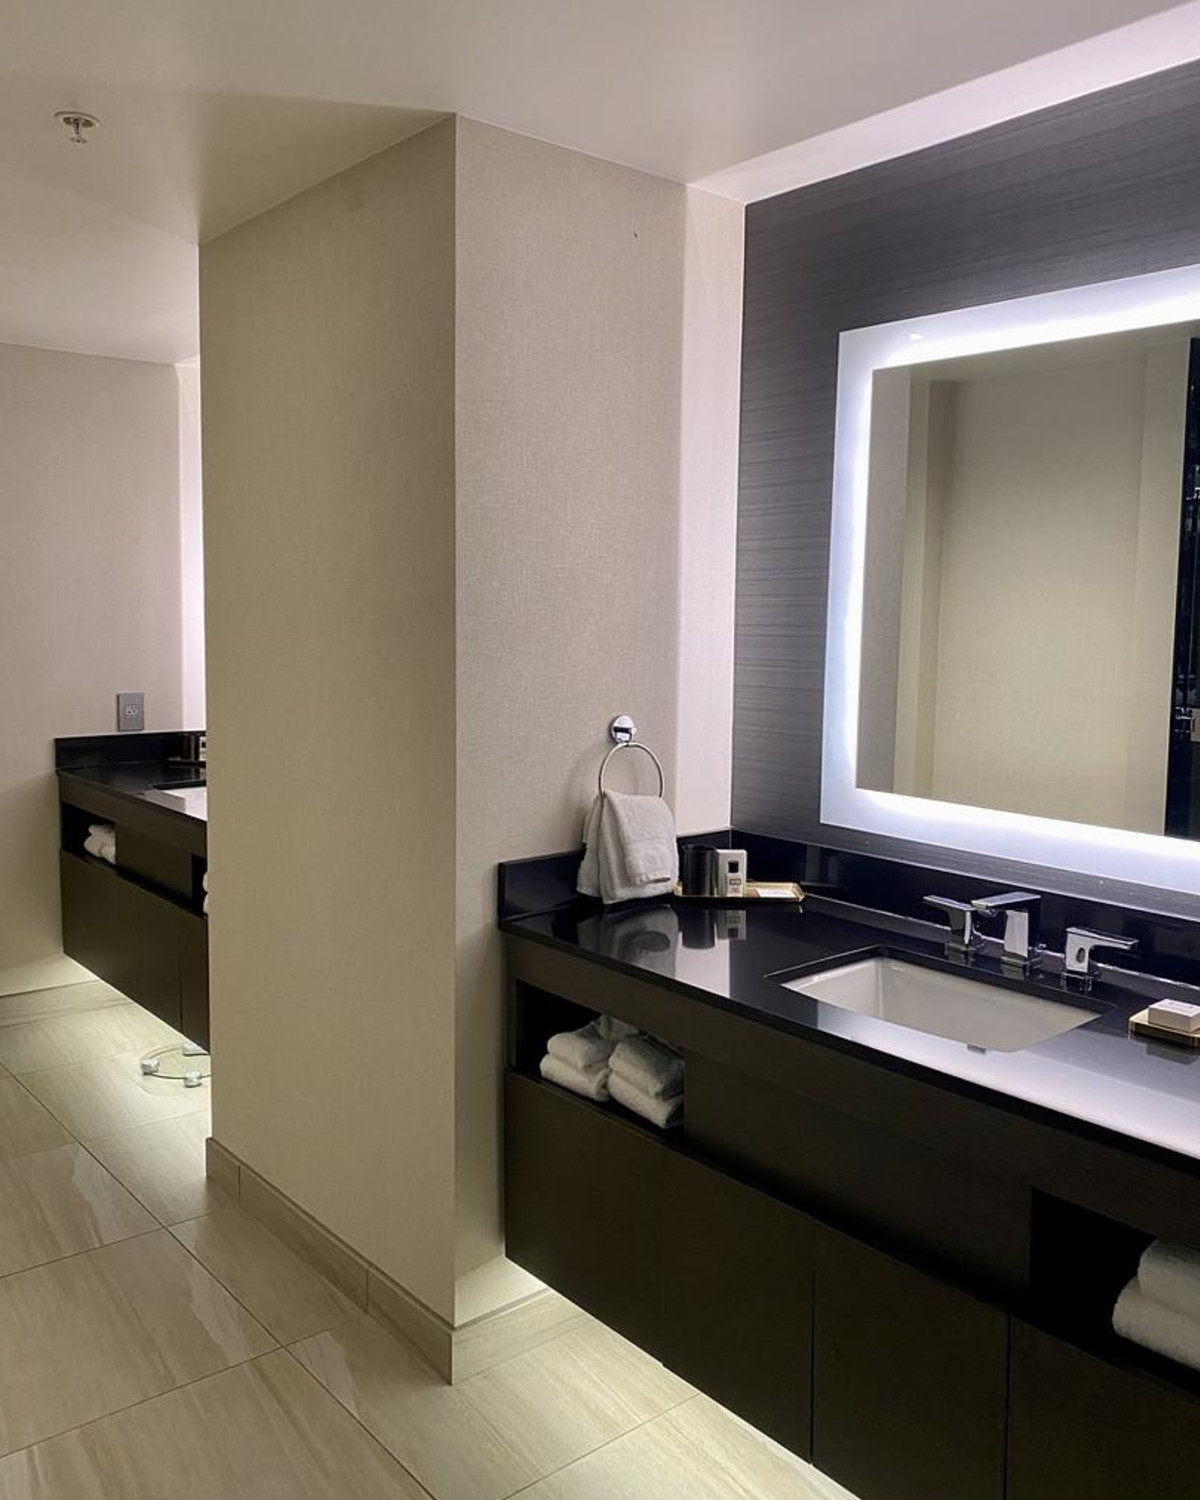 Cleanliness and elegance in powder-room